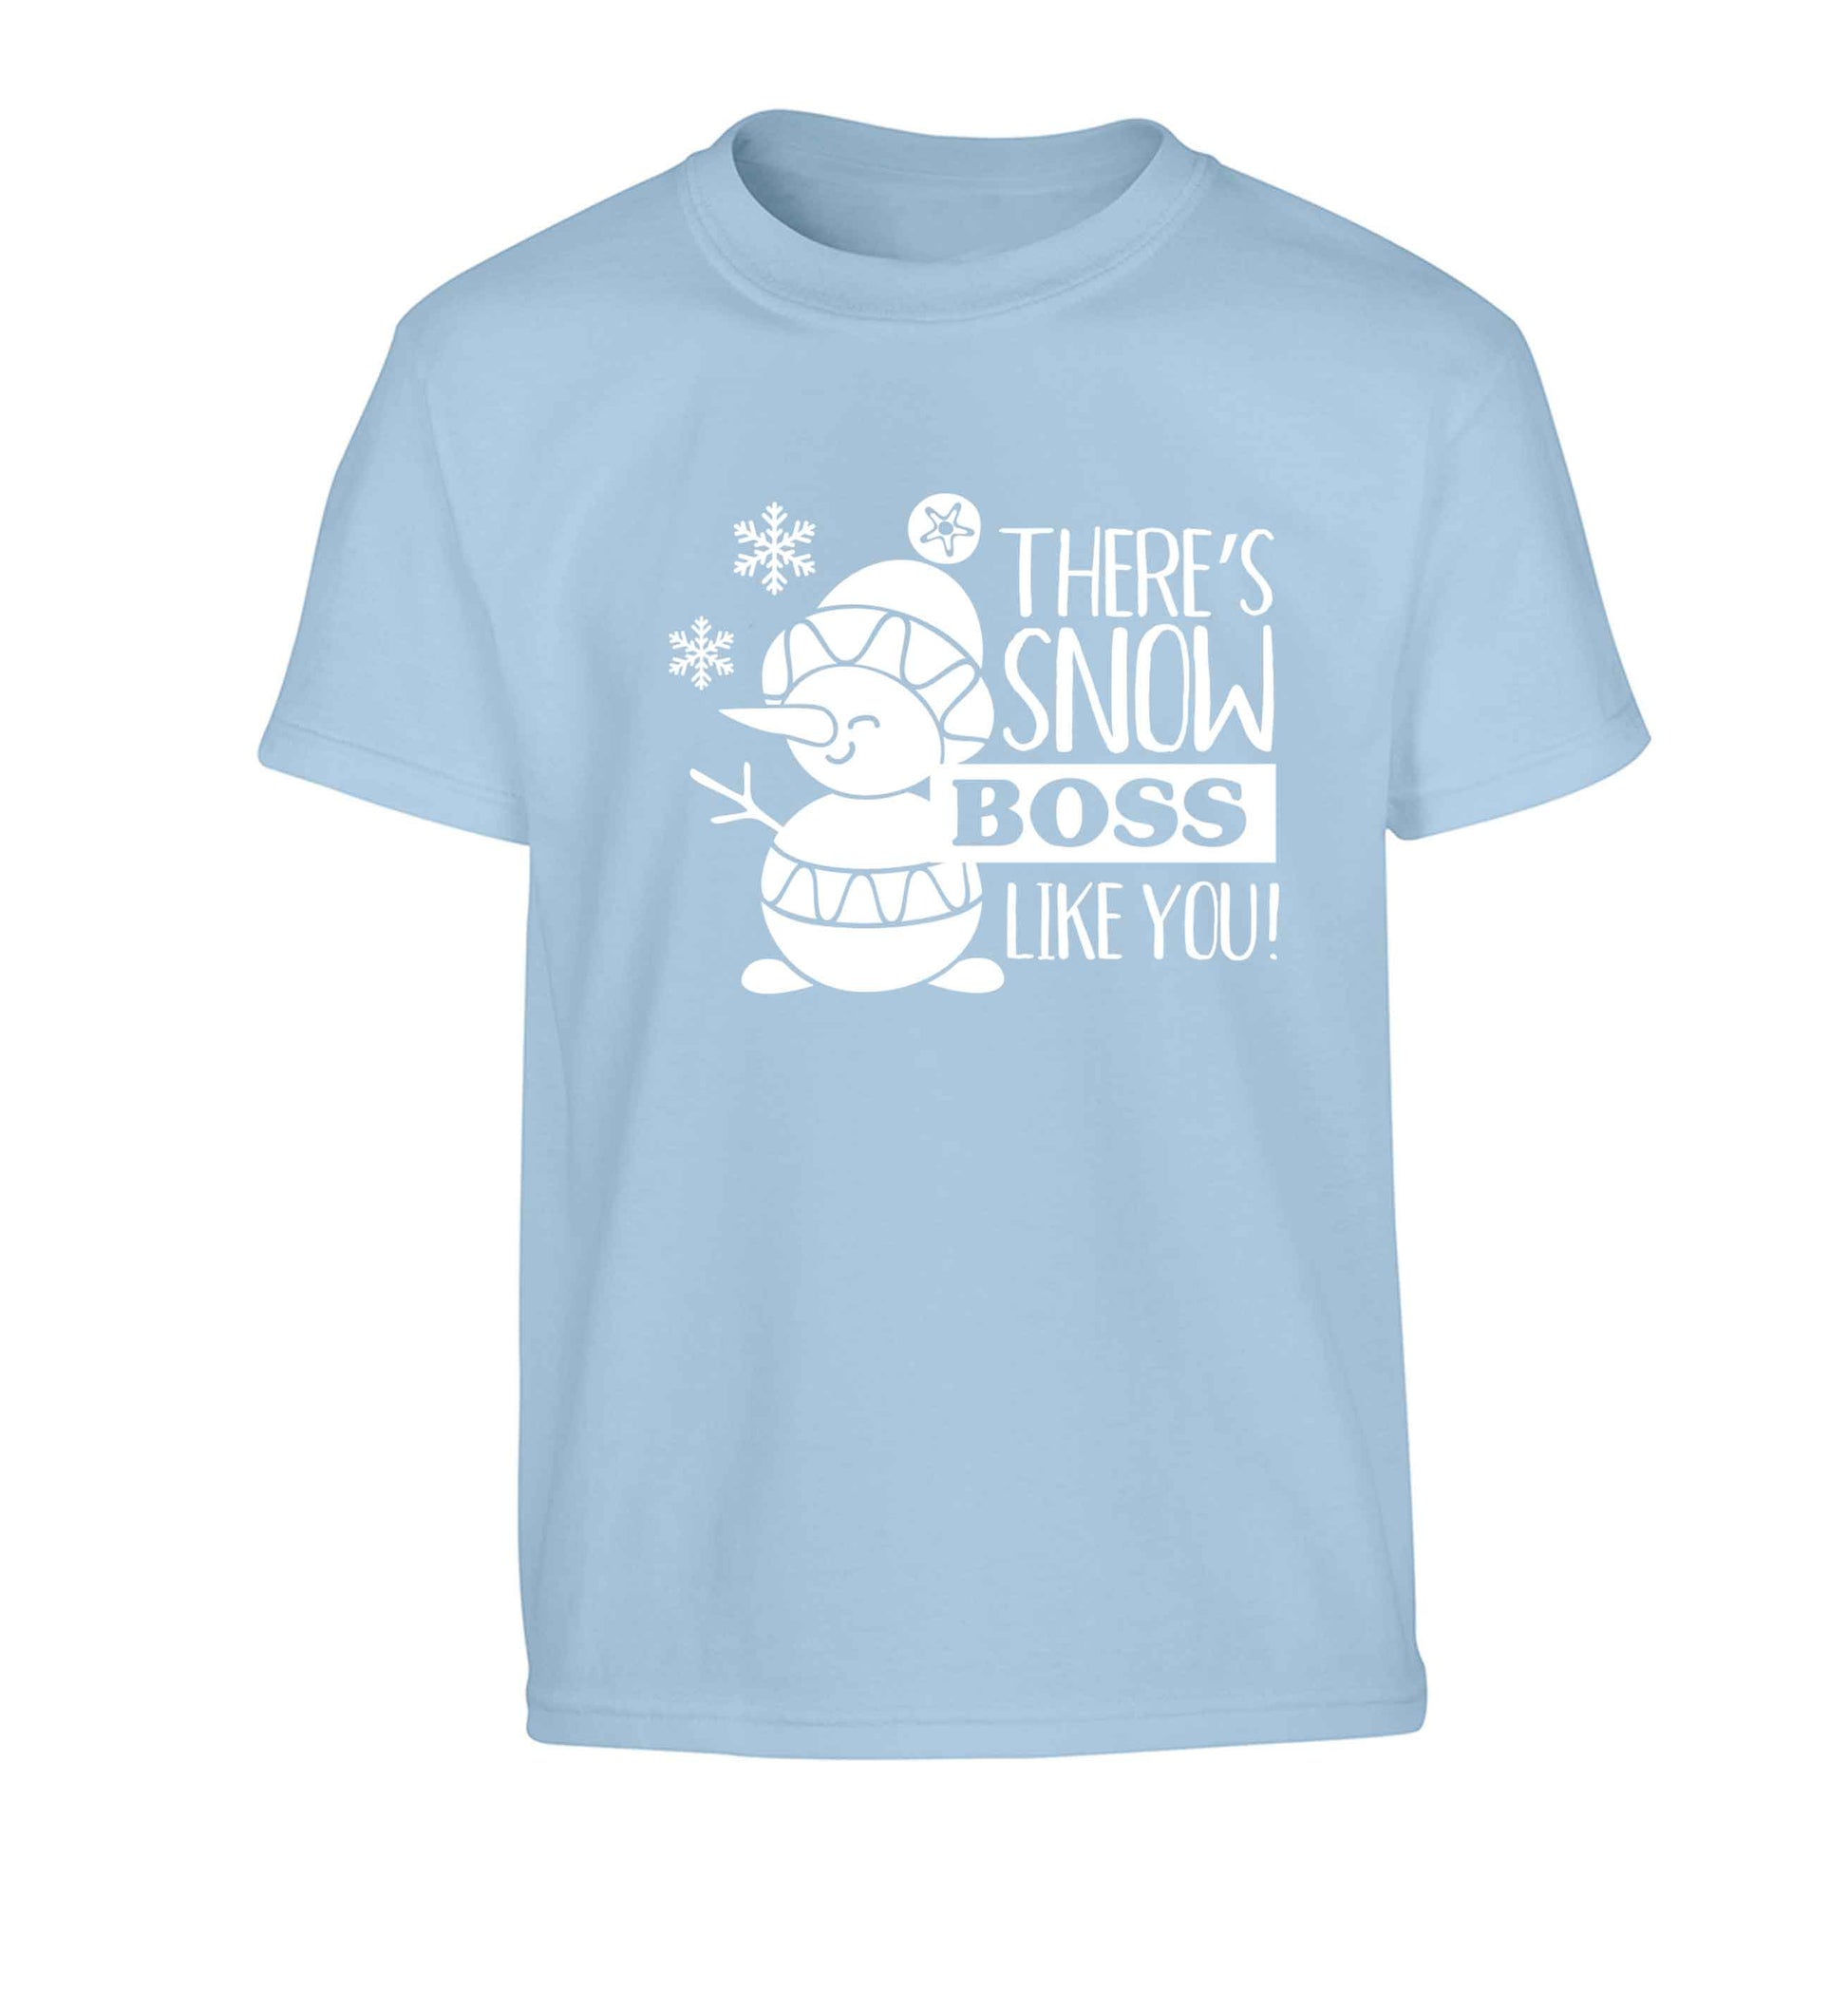 There's snow boss like you Children's light blue Tshirt 12-13 Years